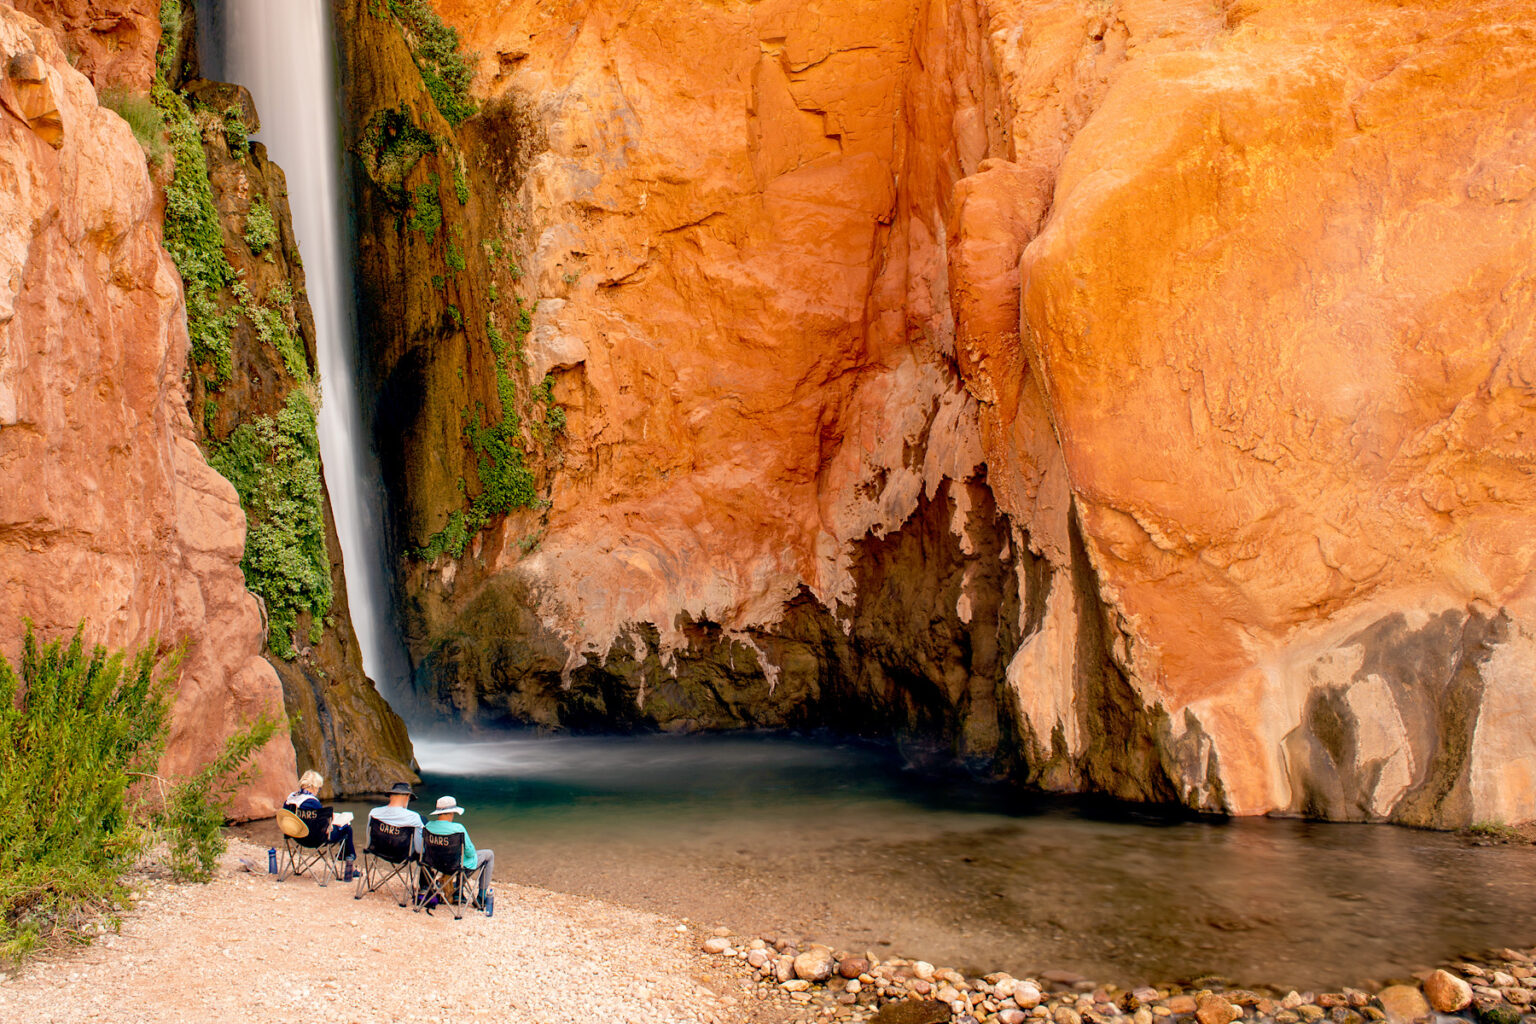 Guests relax and read at foot of Deer Creek Falls in Grand Canyon